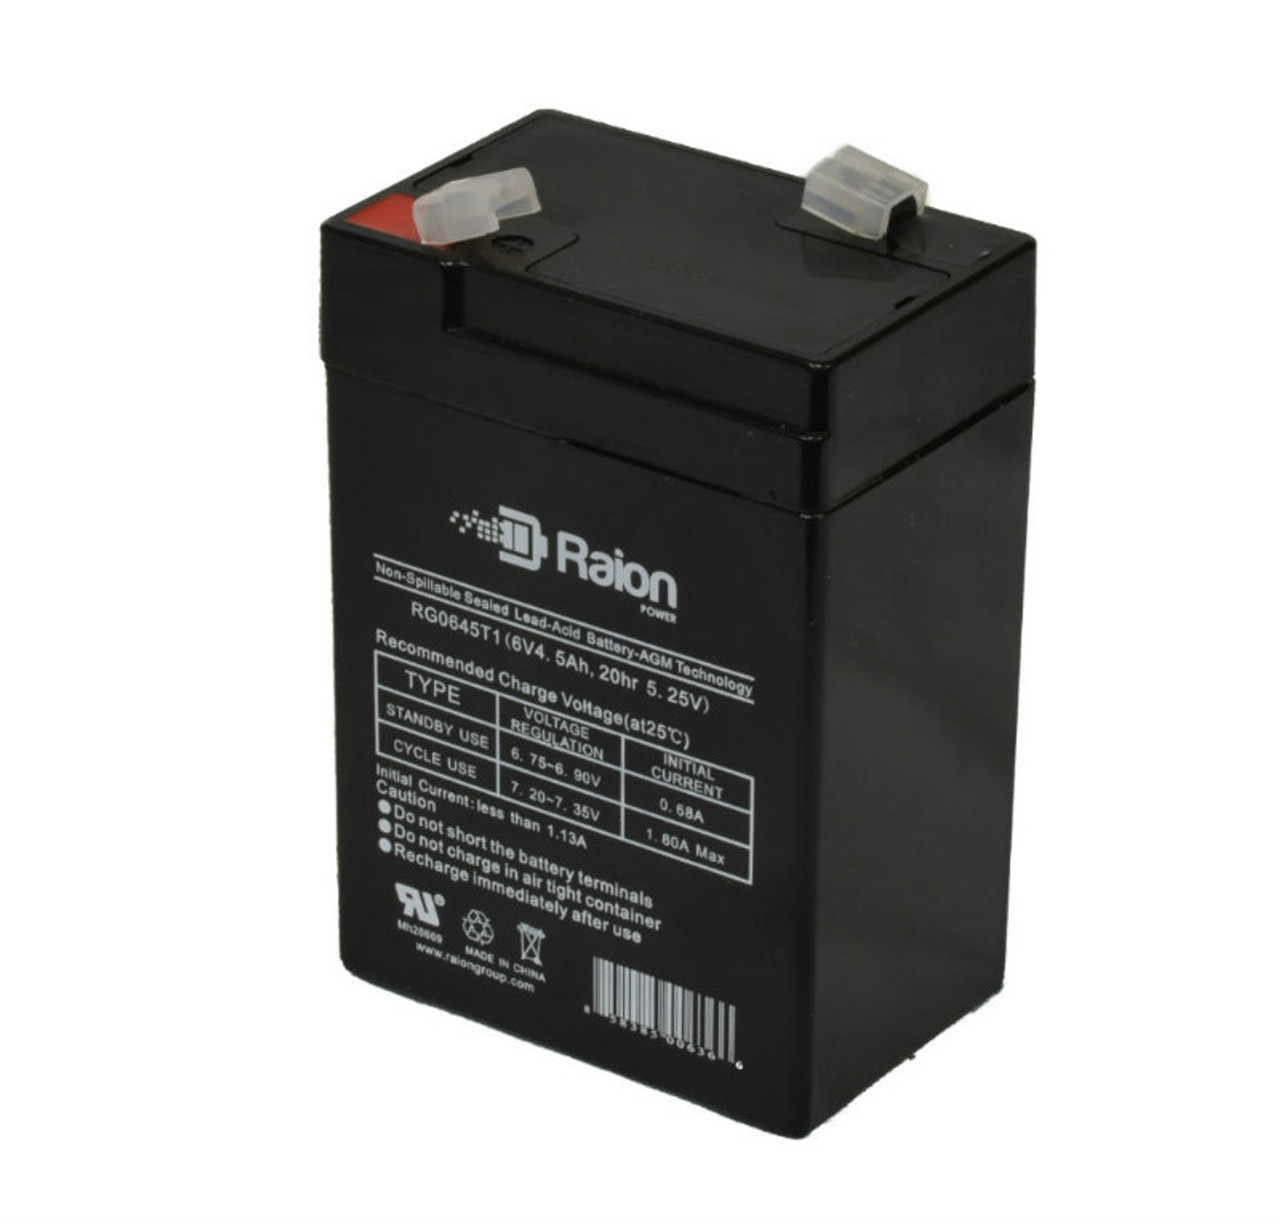 Raion Power RG0645T1 6V 4.5Ah Replacement Battery Cartridge for Vision CP642L